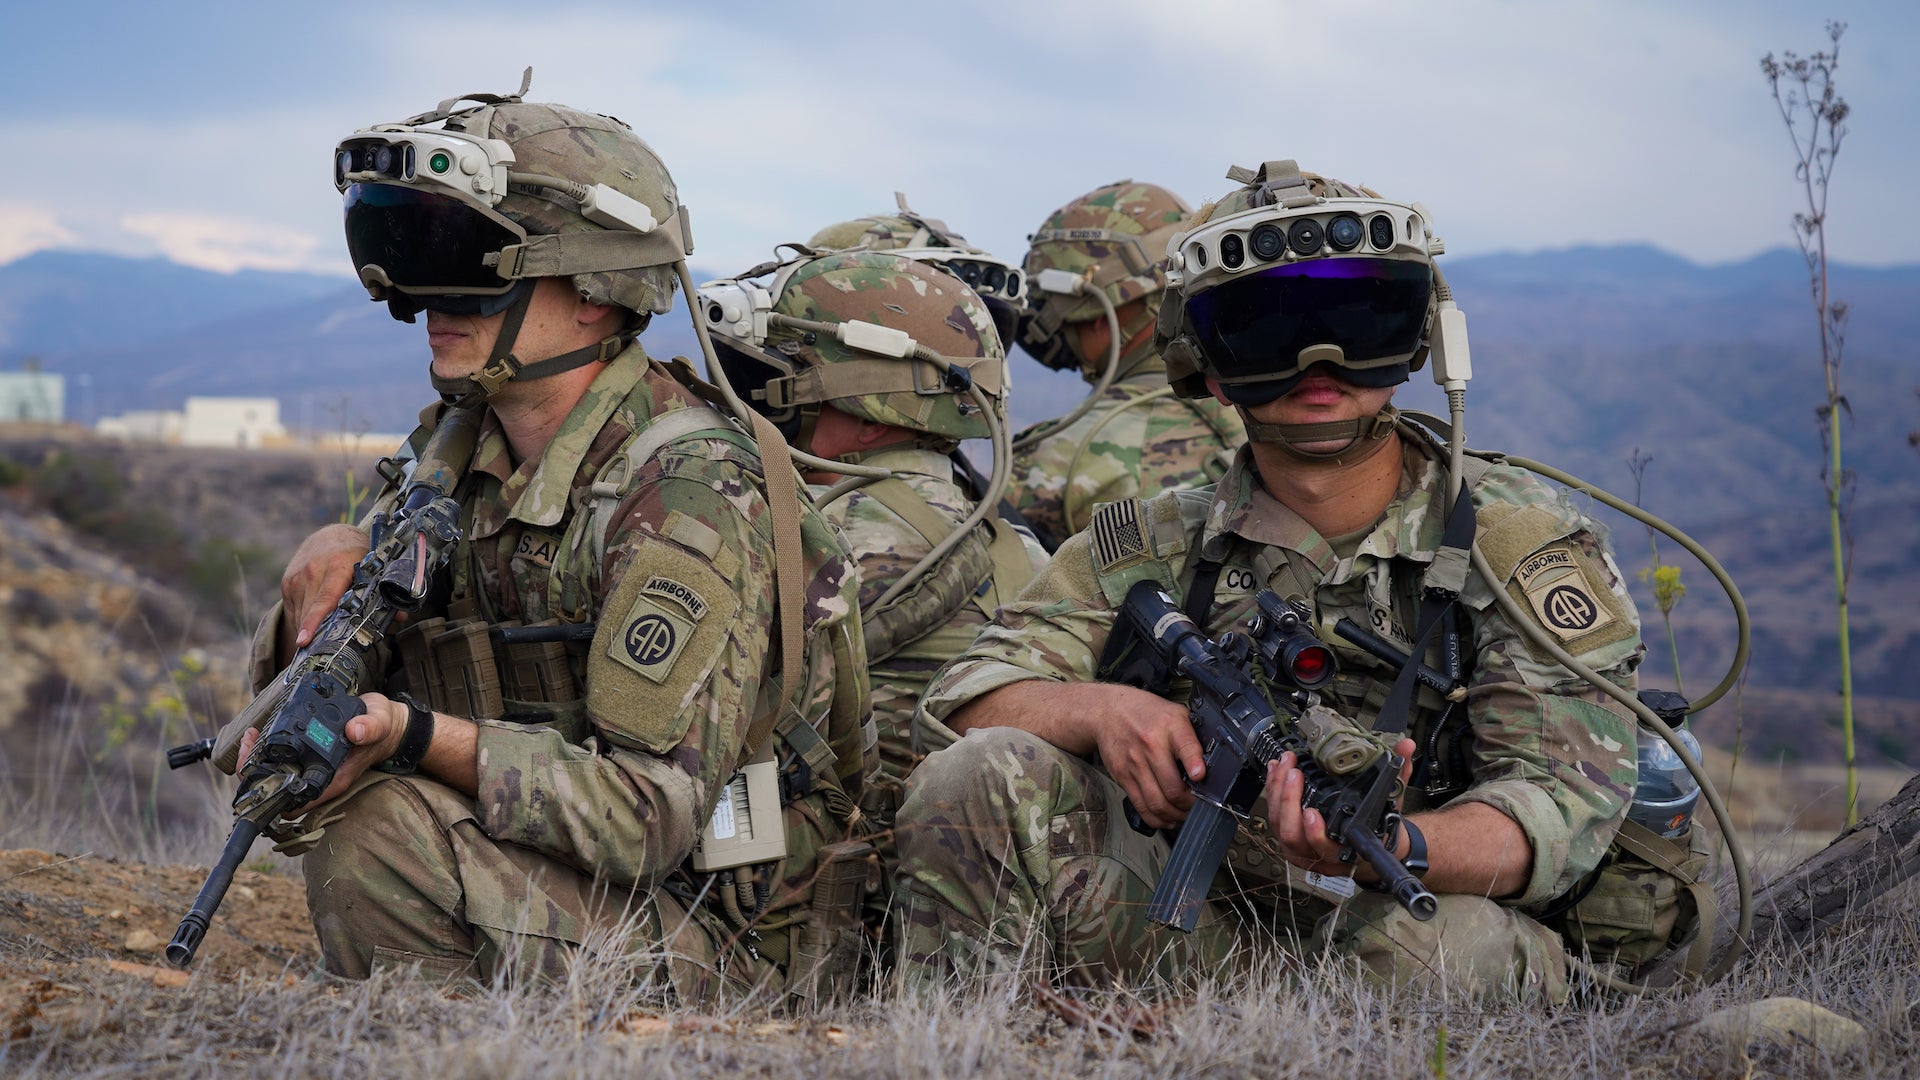    “Soldiers hit fewer targets and engaged targets more slowly with IVAS 1.0 than with their current equipment on the buddy team live fire range.